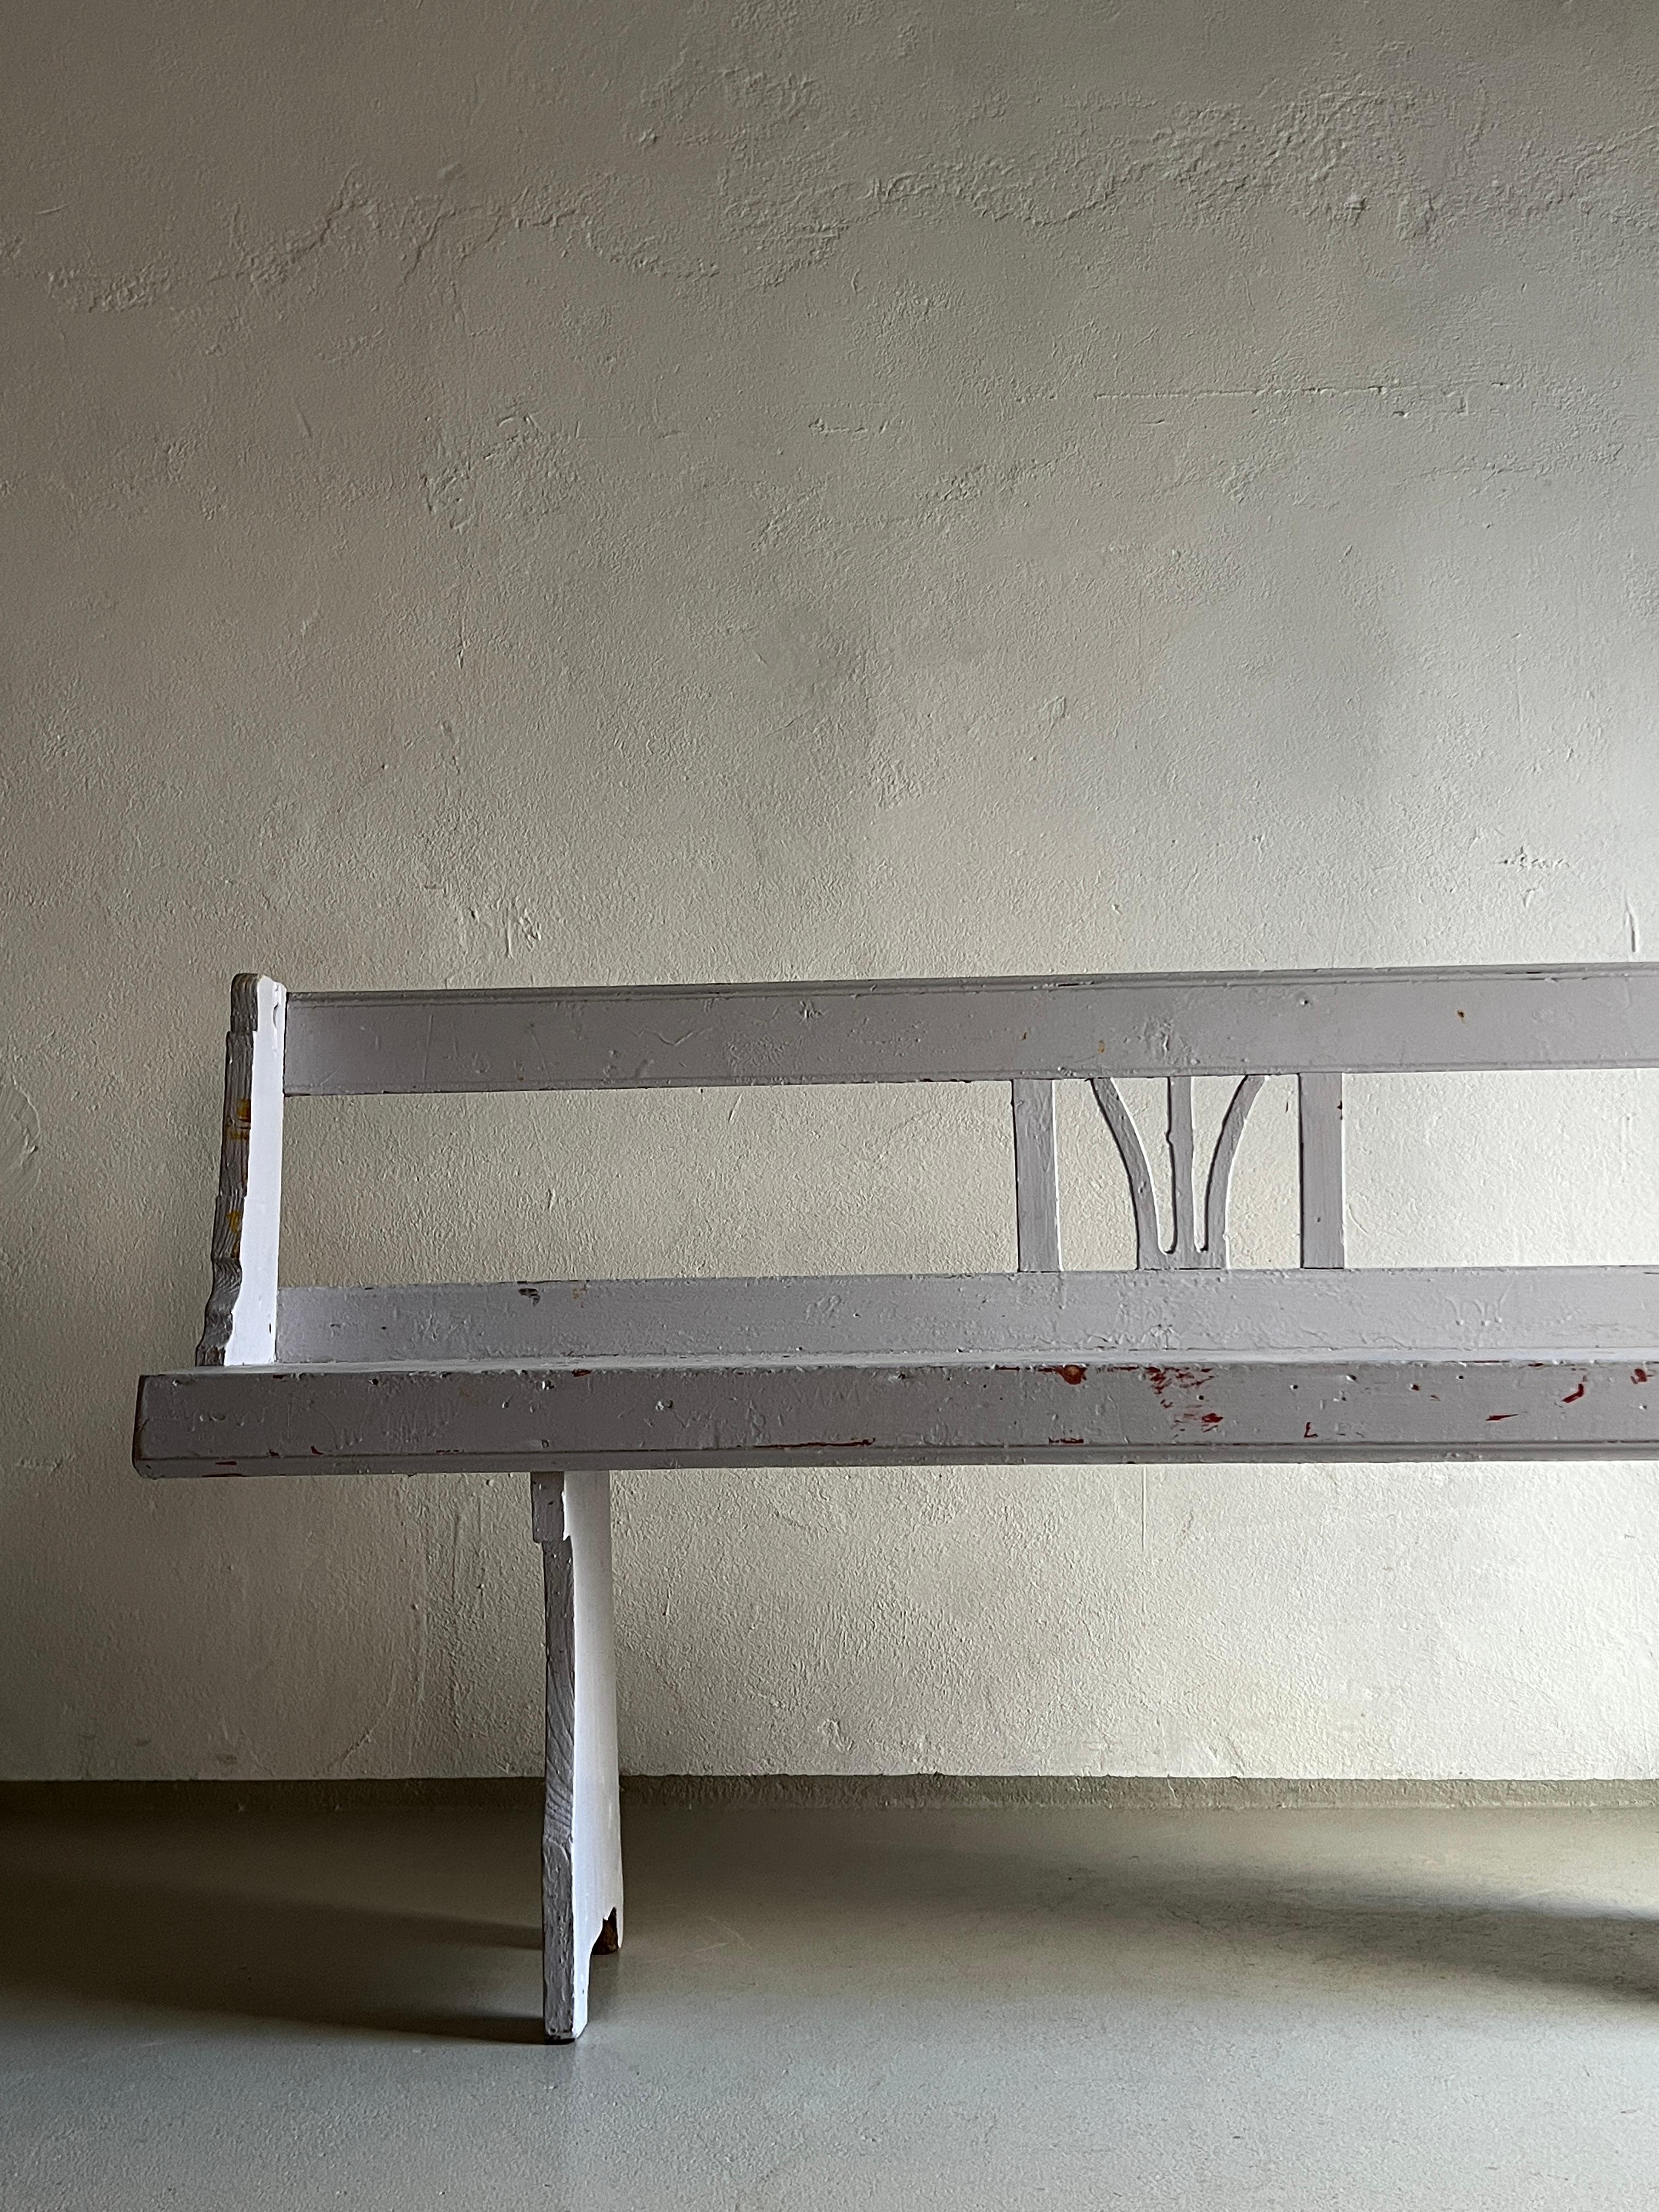 Vintage rustic pained bench with a beautiful color structure - red under light-gray paint.

Additional information:
Country of manufacture: France
Design period: 1920s
Dimensions: 168.5 W x 34 D x 85 H cm
Seat: 51 H cm
Condition: Good vintage